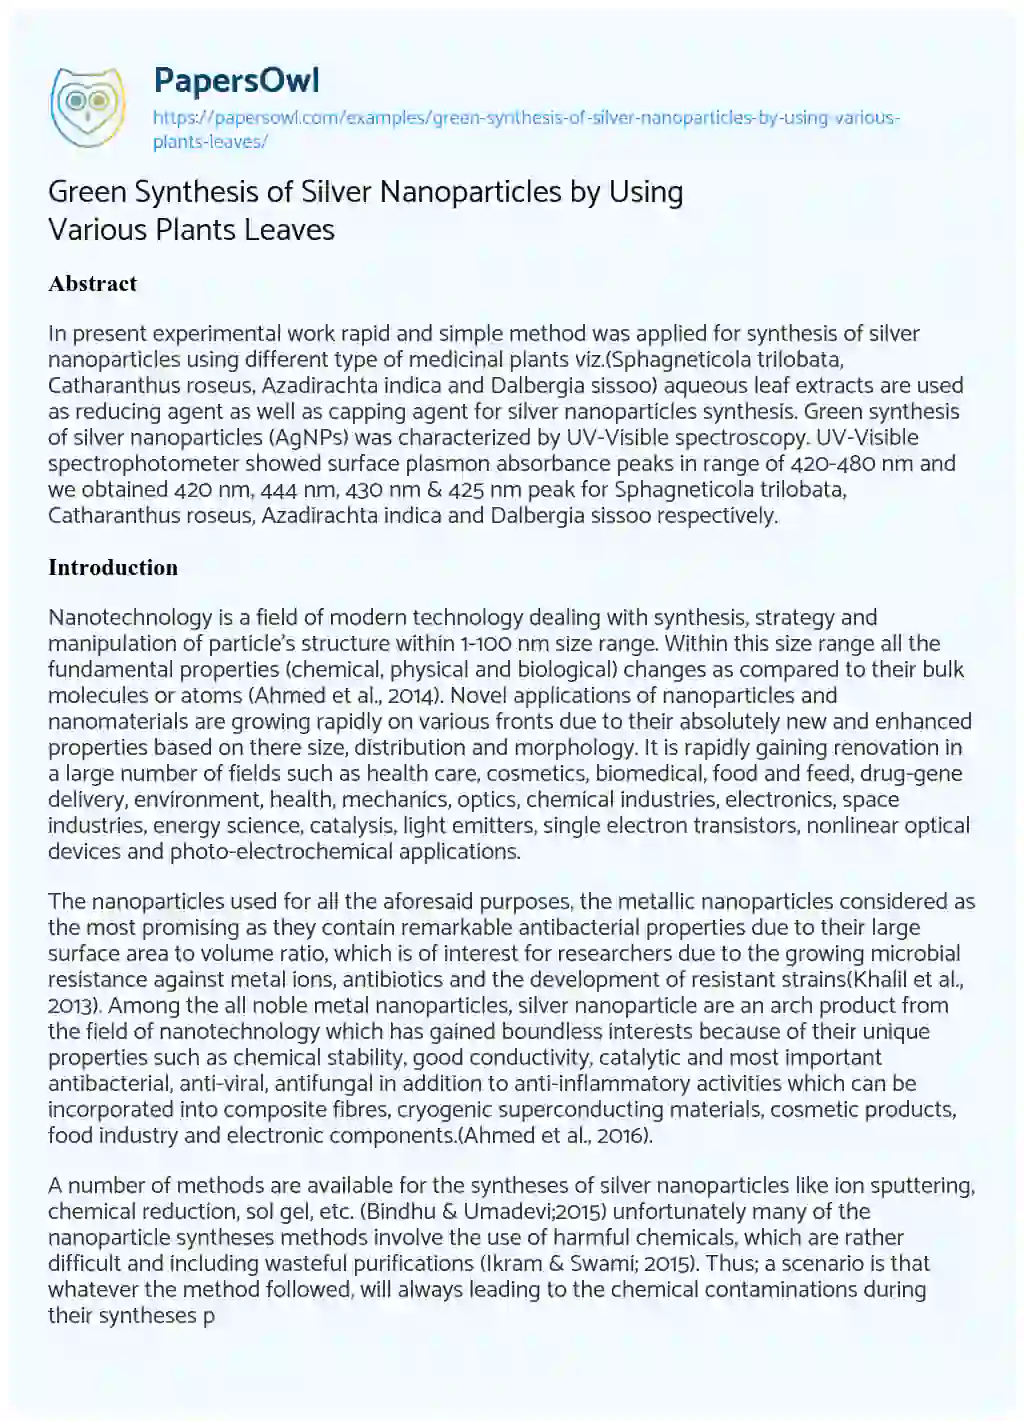 Essay on Green Synthesis of Silver Nanoparticles by Using Various Plants Leaves